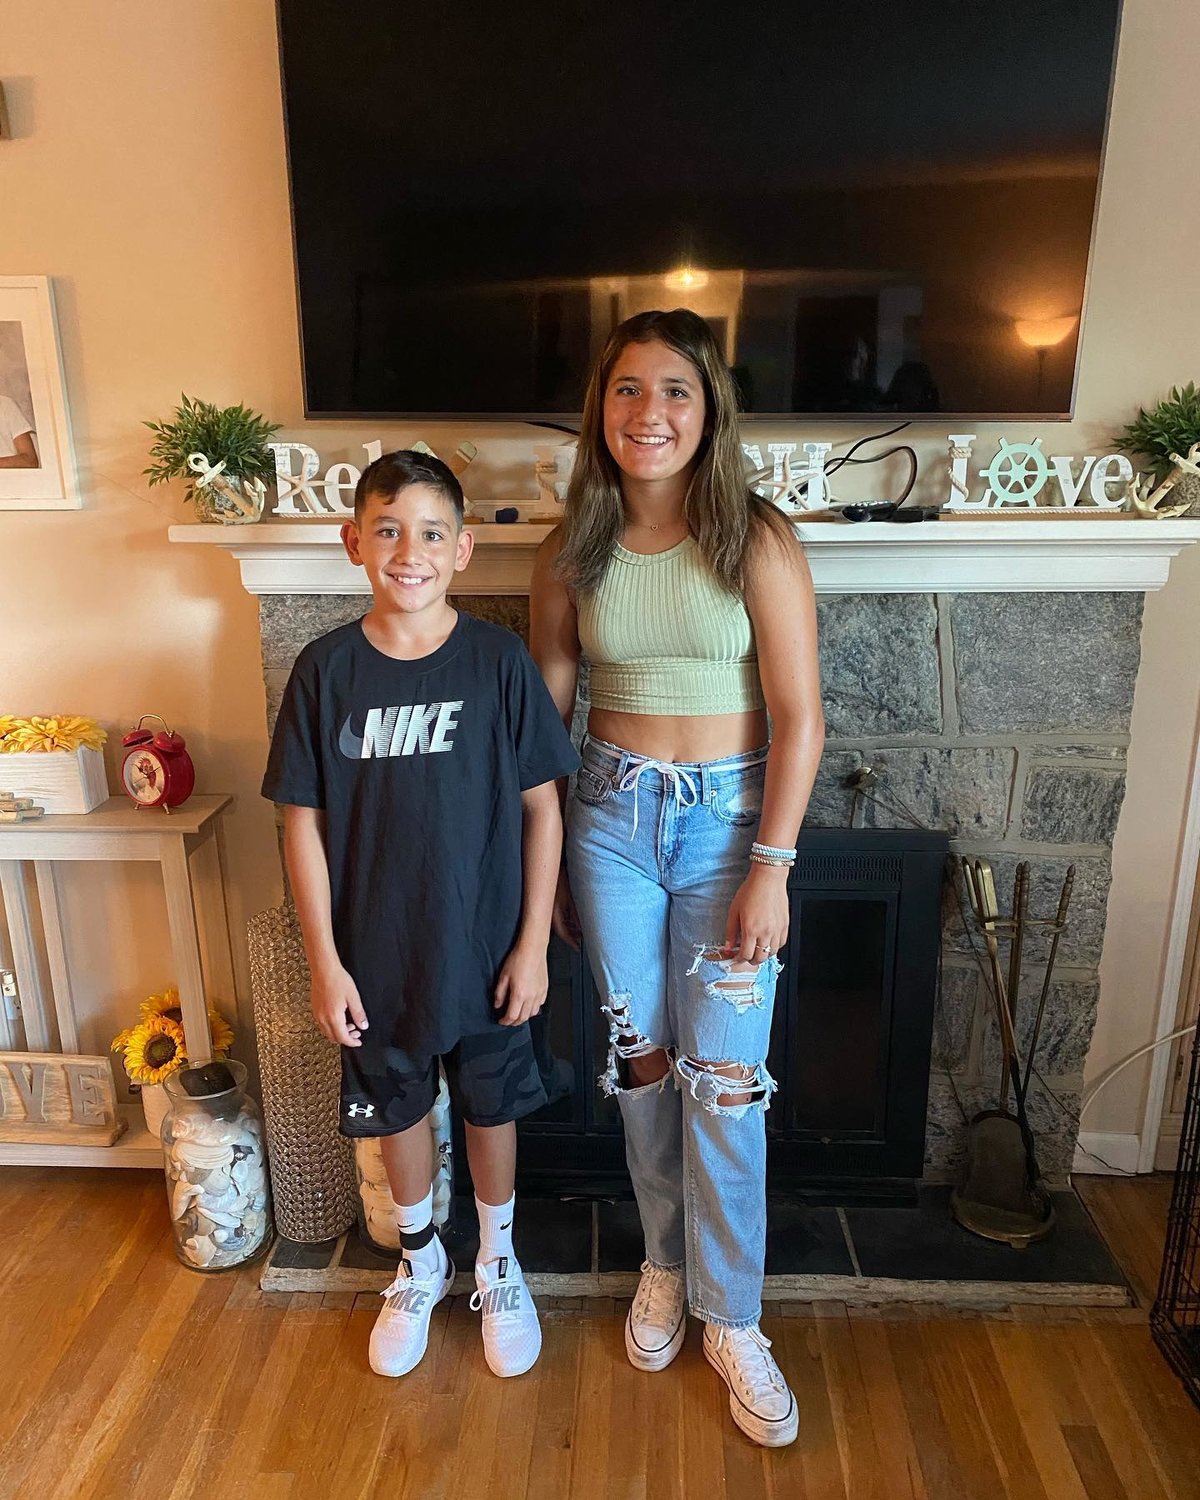 Kayla, ninth grade, and Albie, sixth grade 
“Being with friends and sports.”